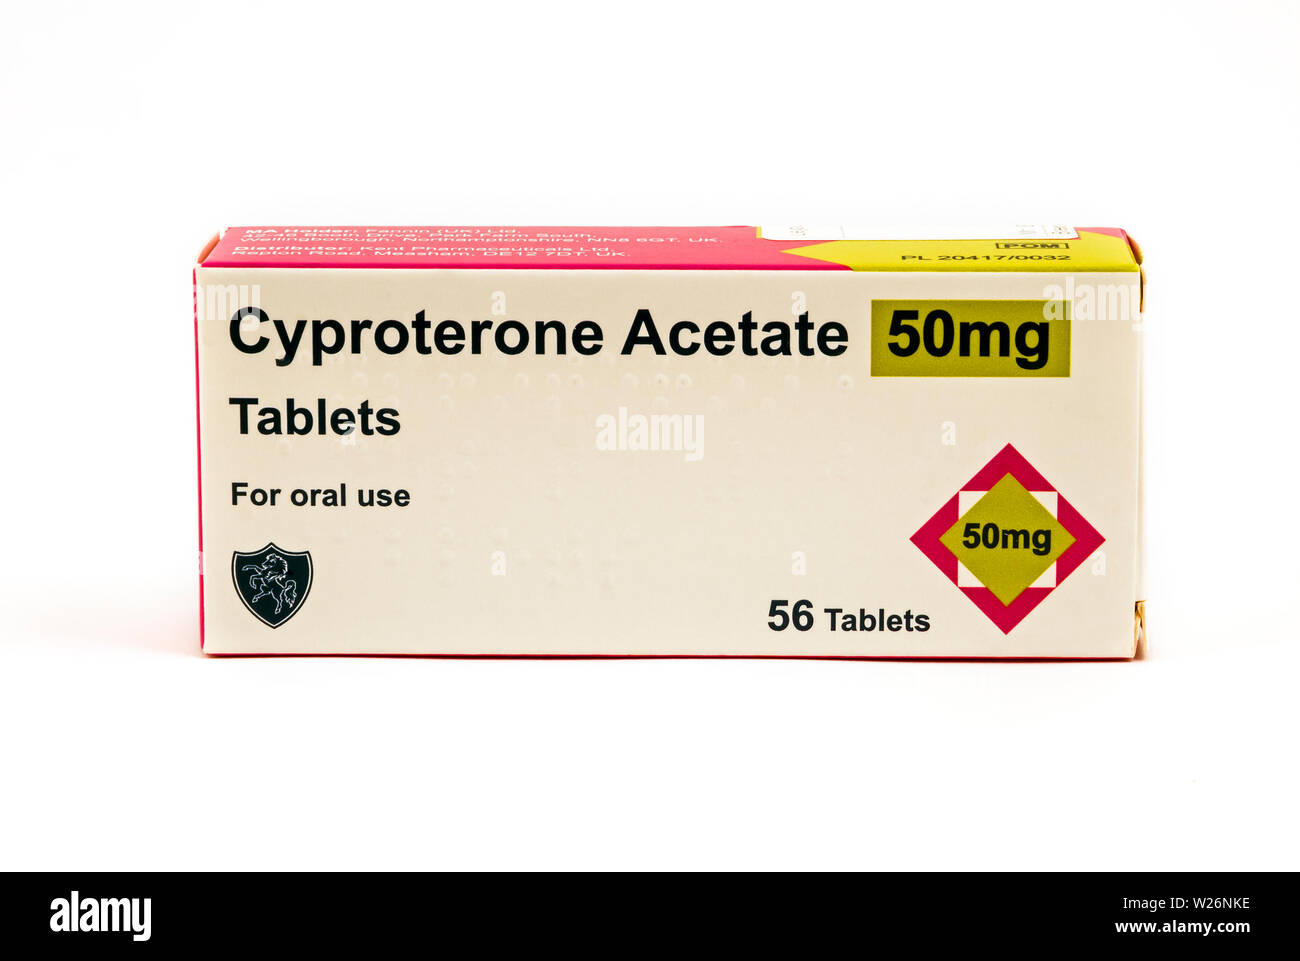 Cyproterone acetate, a hormonal therapy drug used to treat prostate cancer. Stock Photo